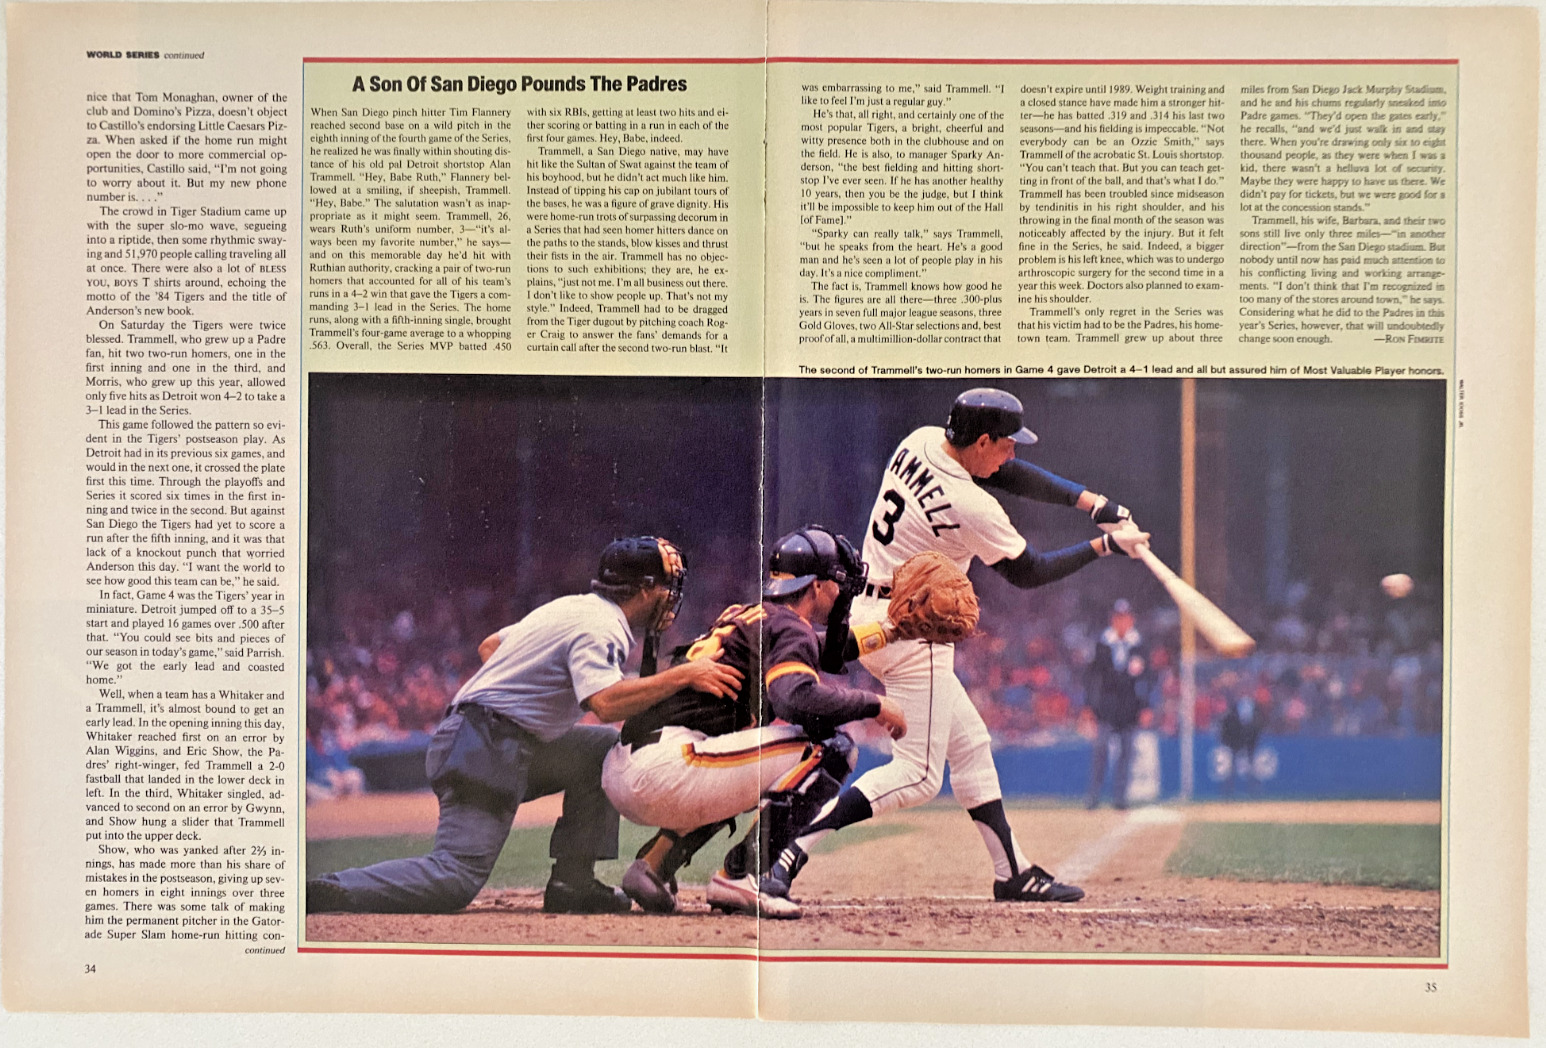 Alan Trammell Detroit Tigers World Series vs Padres Vintage 1984 Mag Article